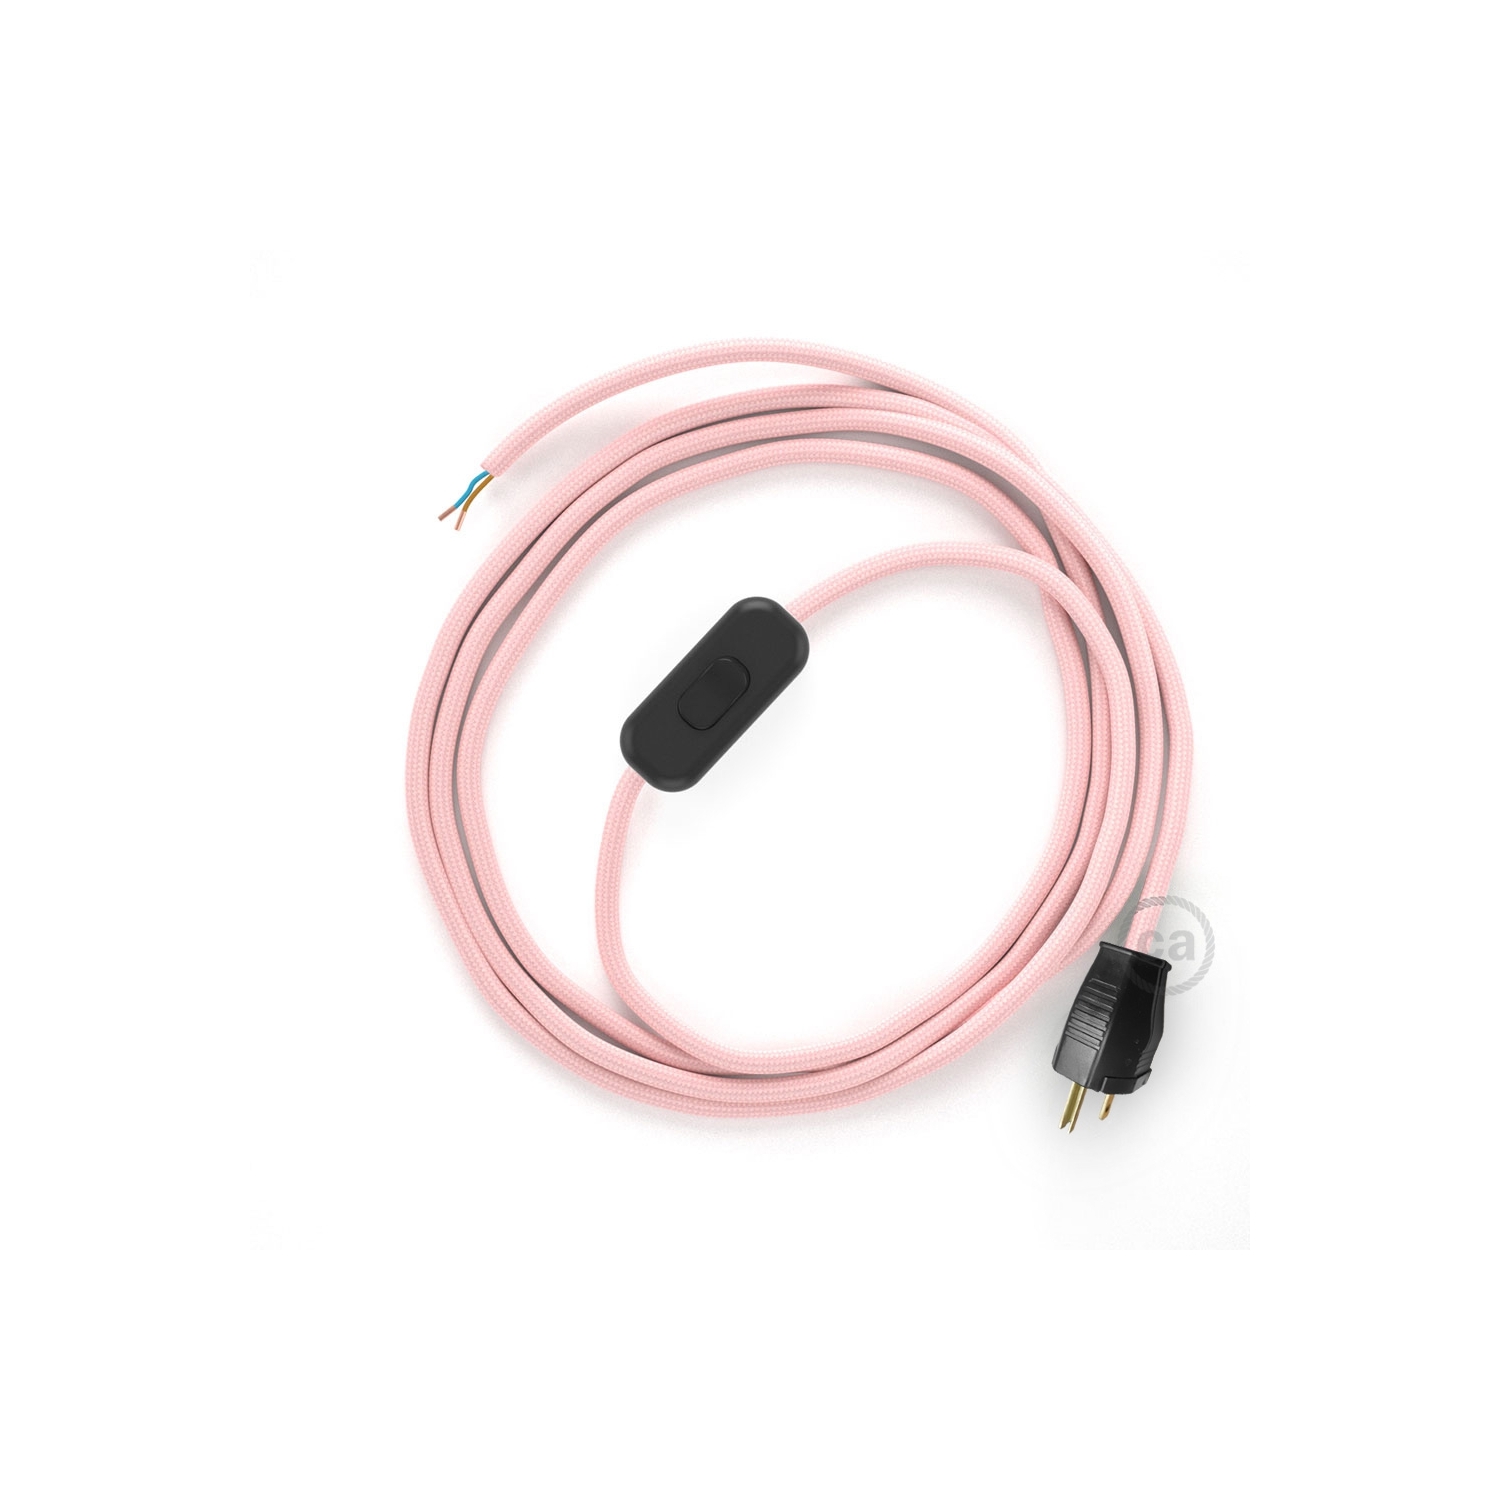 Power Cord with in-line switch, RM16 Pink Rayon - Choose color of switch/plug